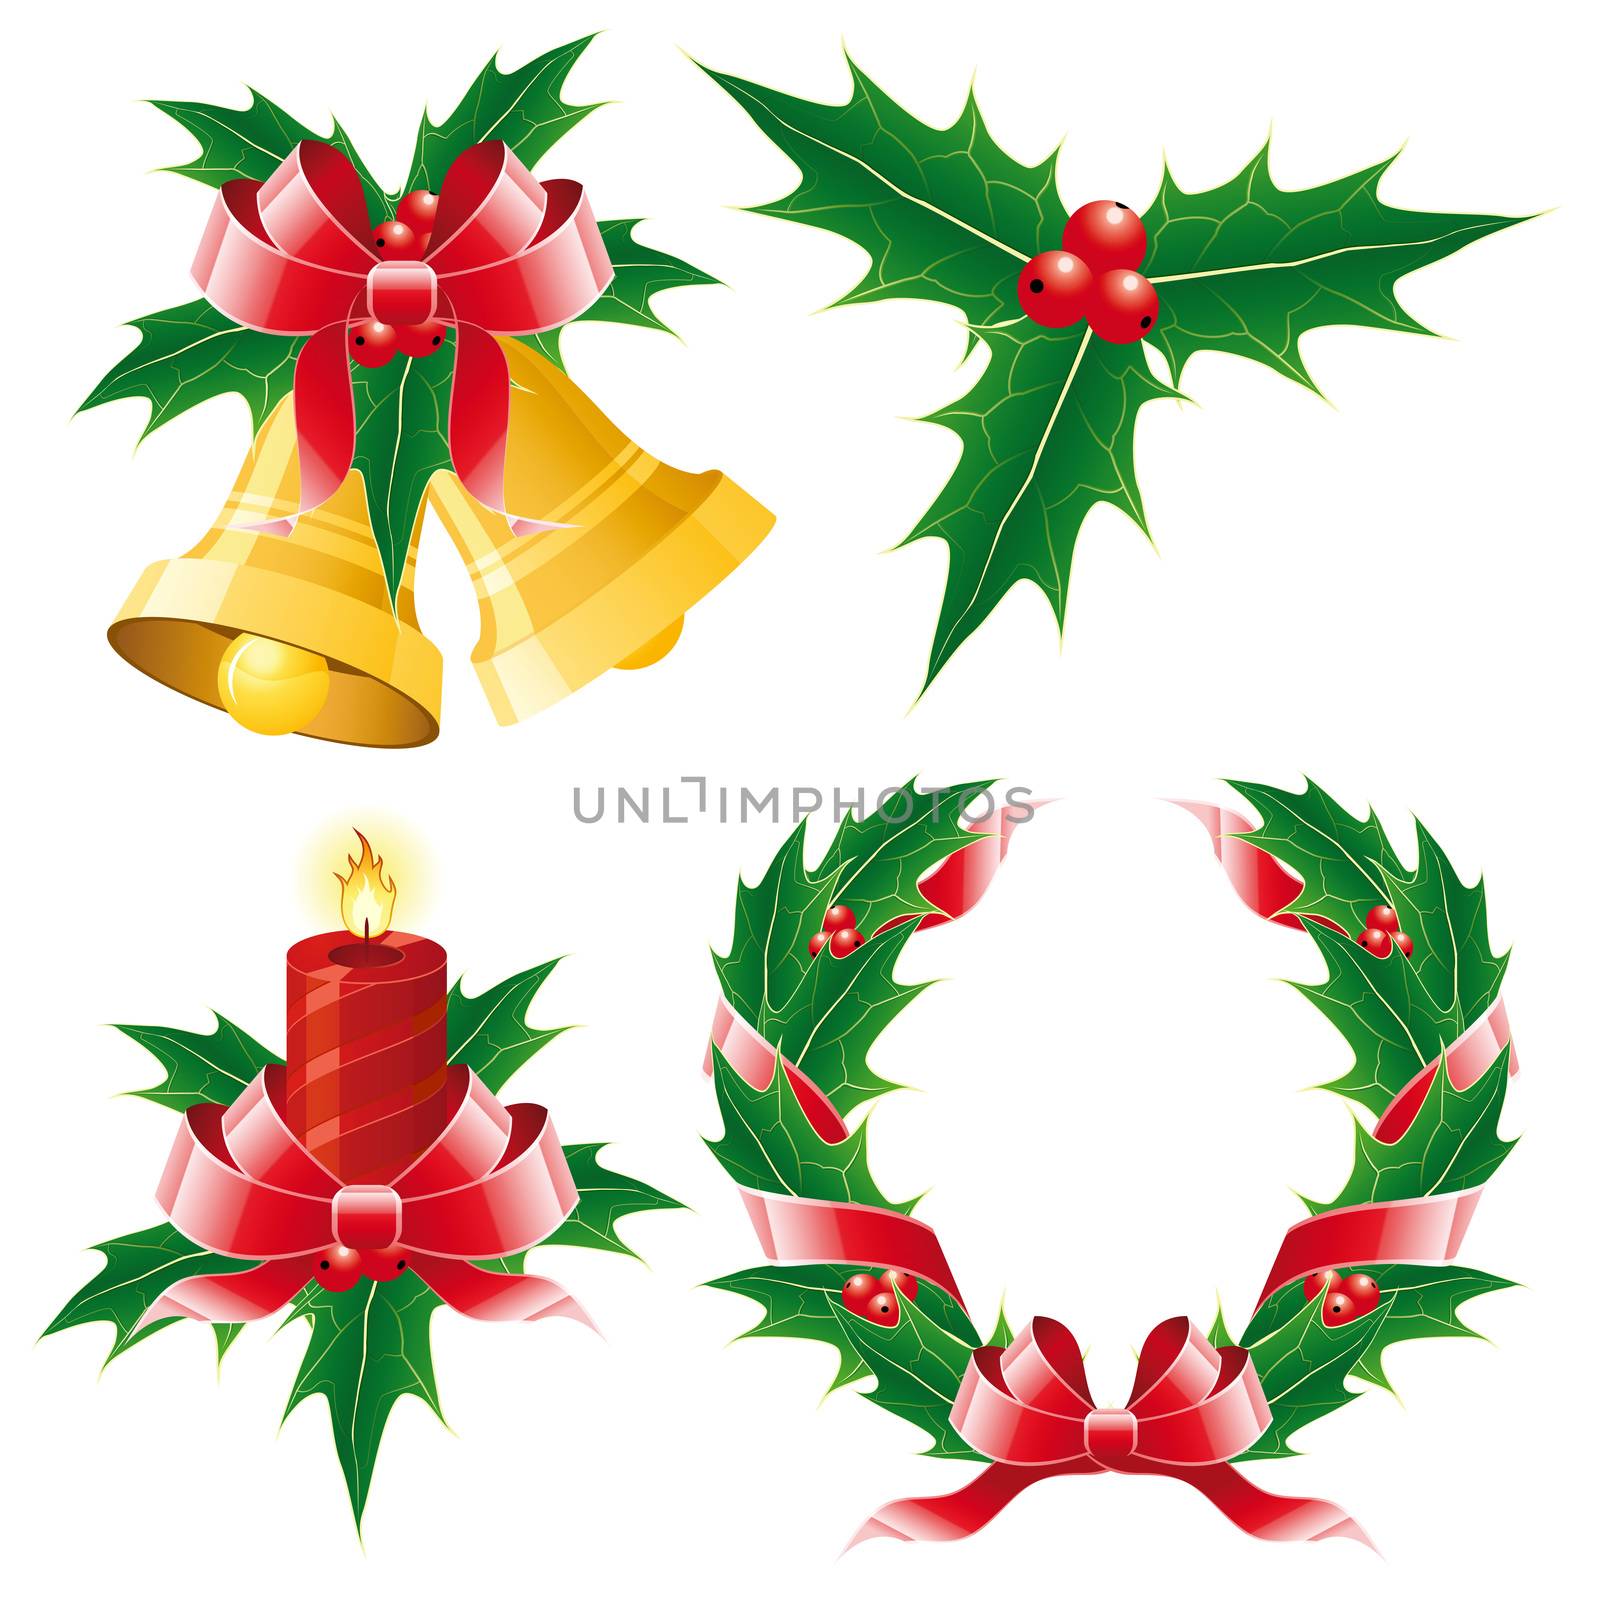 Christmas icon set of four element - bell candle mistletoe wreath